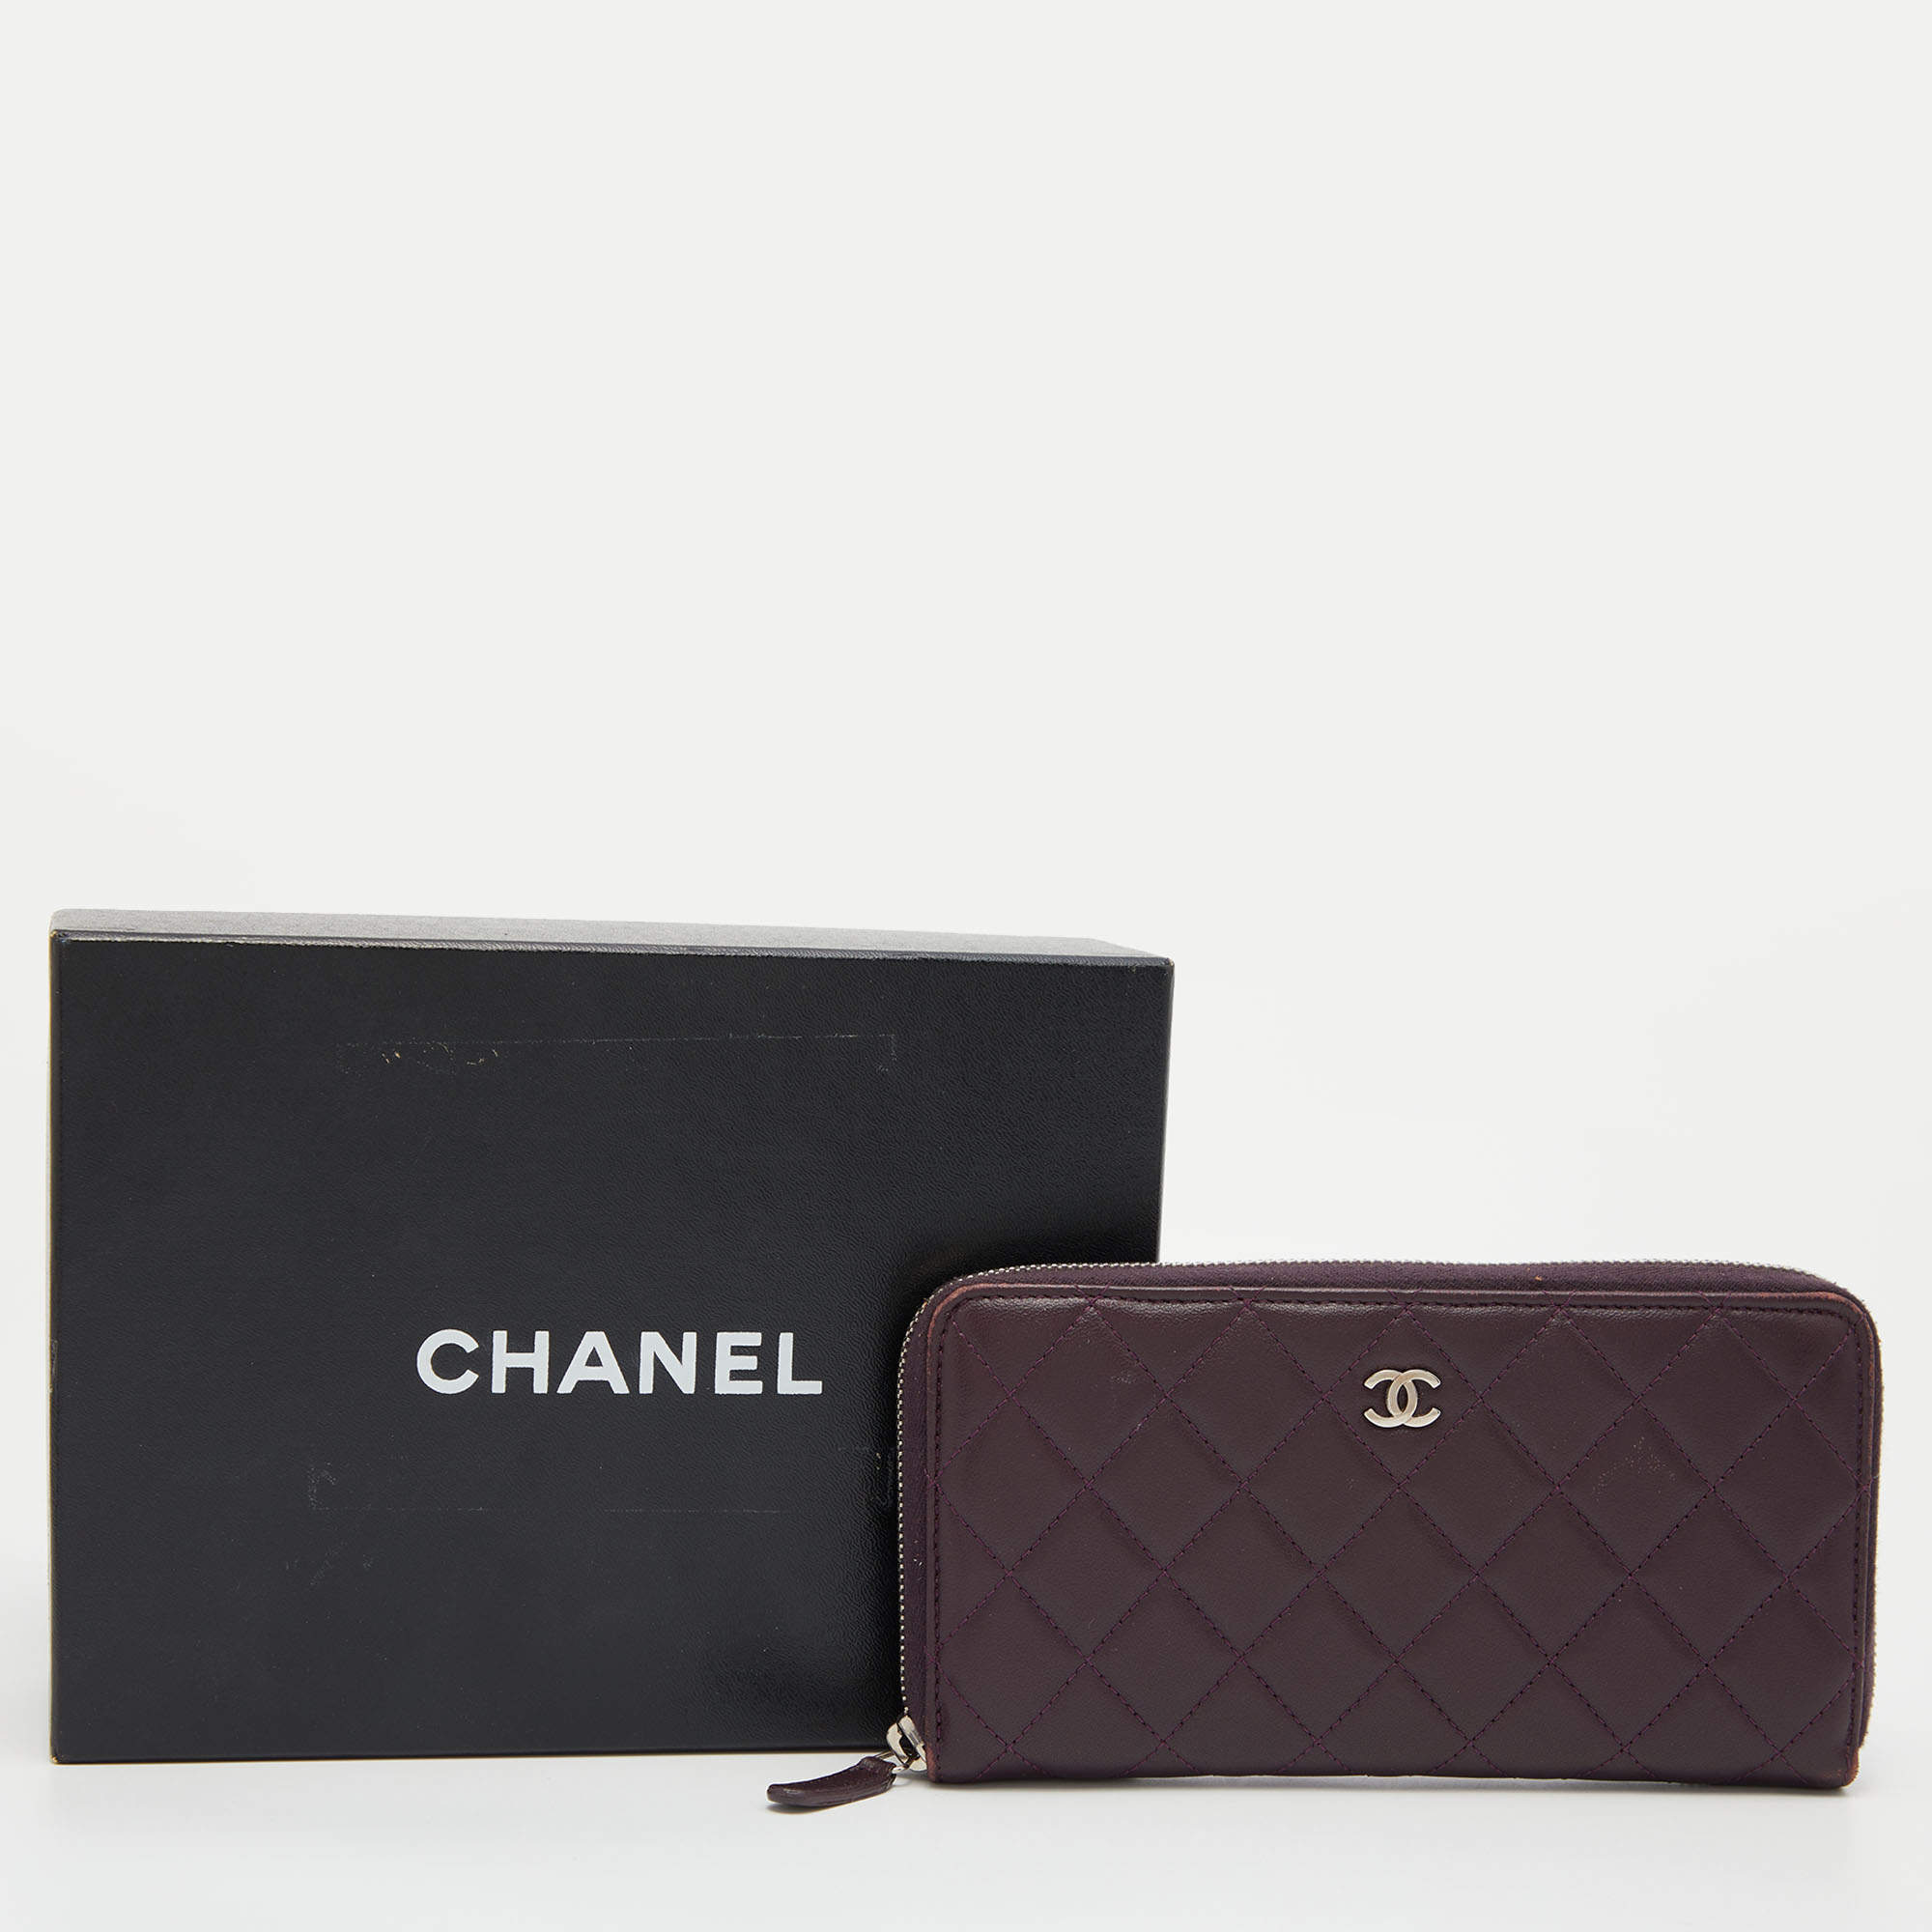 Chanel Purple Quilted Leather CC Zip Around Wallet Chanel